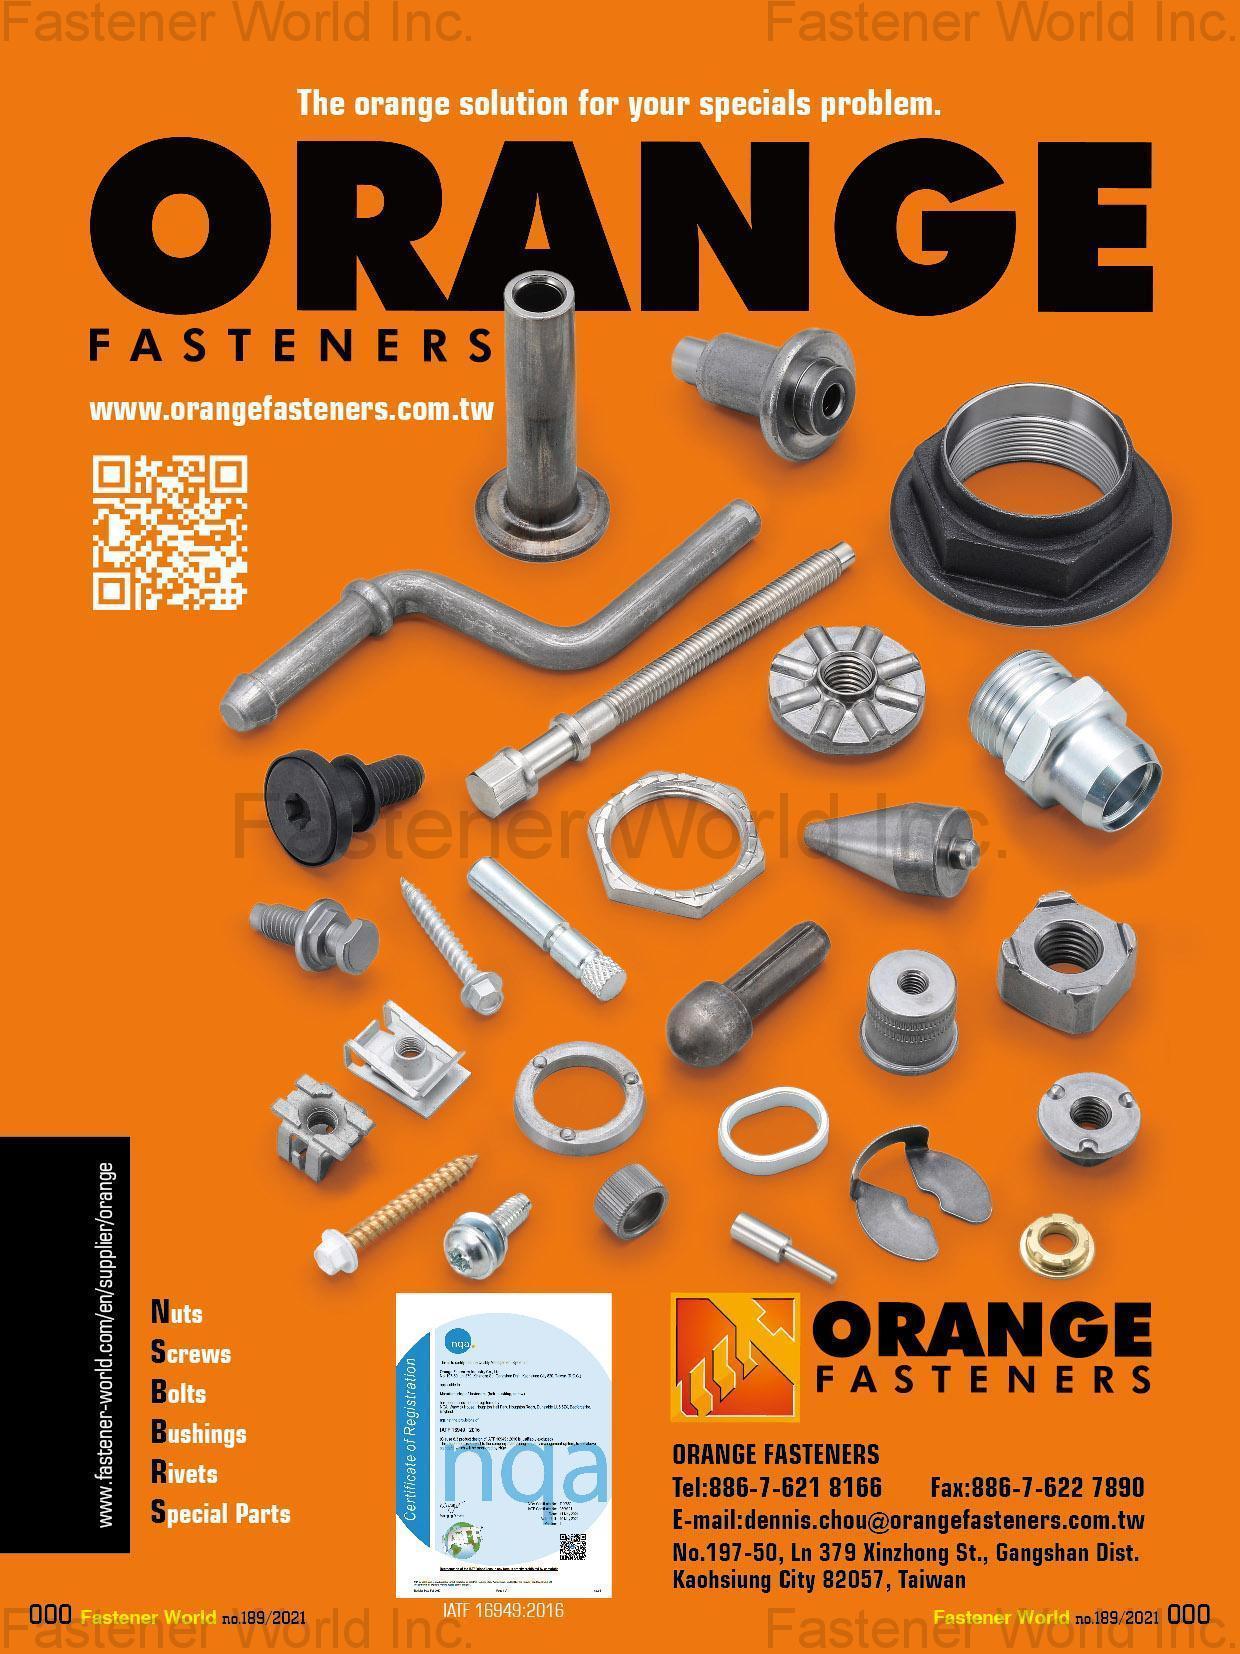 ORANGE FASTENERS , Nuts, Screws, Bolts, Bushings, Rivets, Special Parts, Fluid System Nuts, Prevailing Torque Nuts, Slotted Nuts, Castle Nuts & Specials, Weld Nuts, Clinch Nuts, Special Nuts, Plastic Screws, M-Point Screws, Weld-Studs, Machine Screws, Tri-Lobular/Thread Forming, Sheet Metal Screws, Screw & Washer Assembly, 